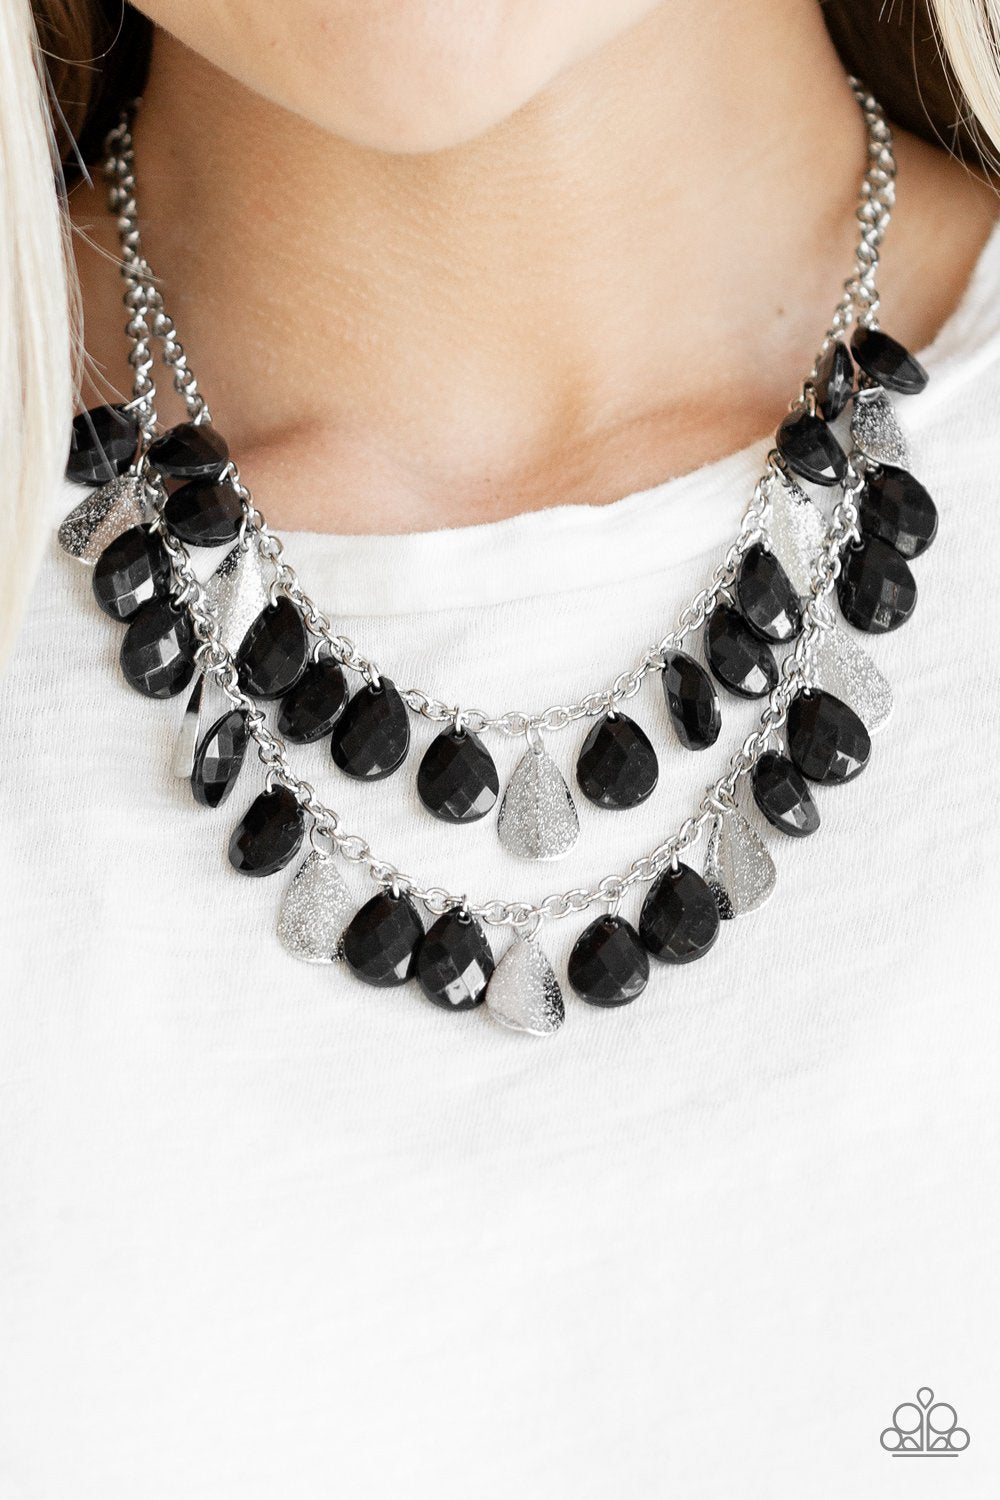 Life of the Fiesta-black-Paparazzi necklace